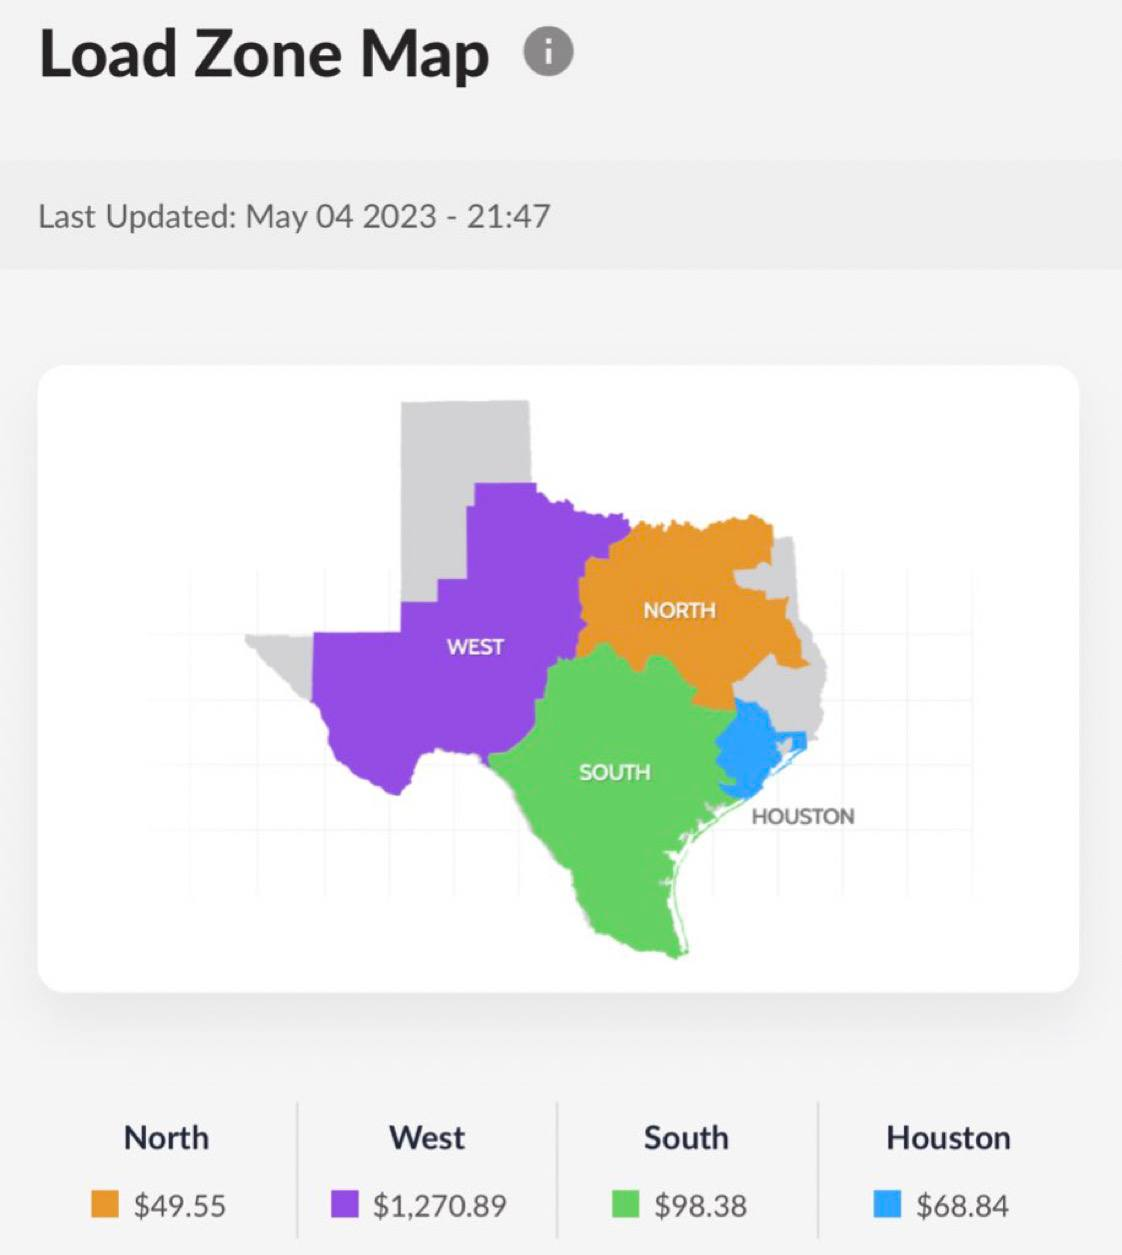 May 4, 2023 (21:47) load zone prices for Texas | Source: ERCOT